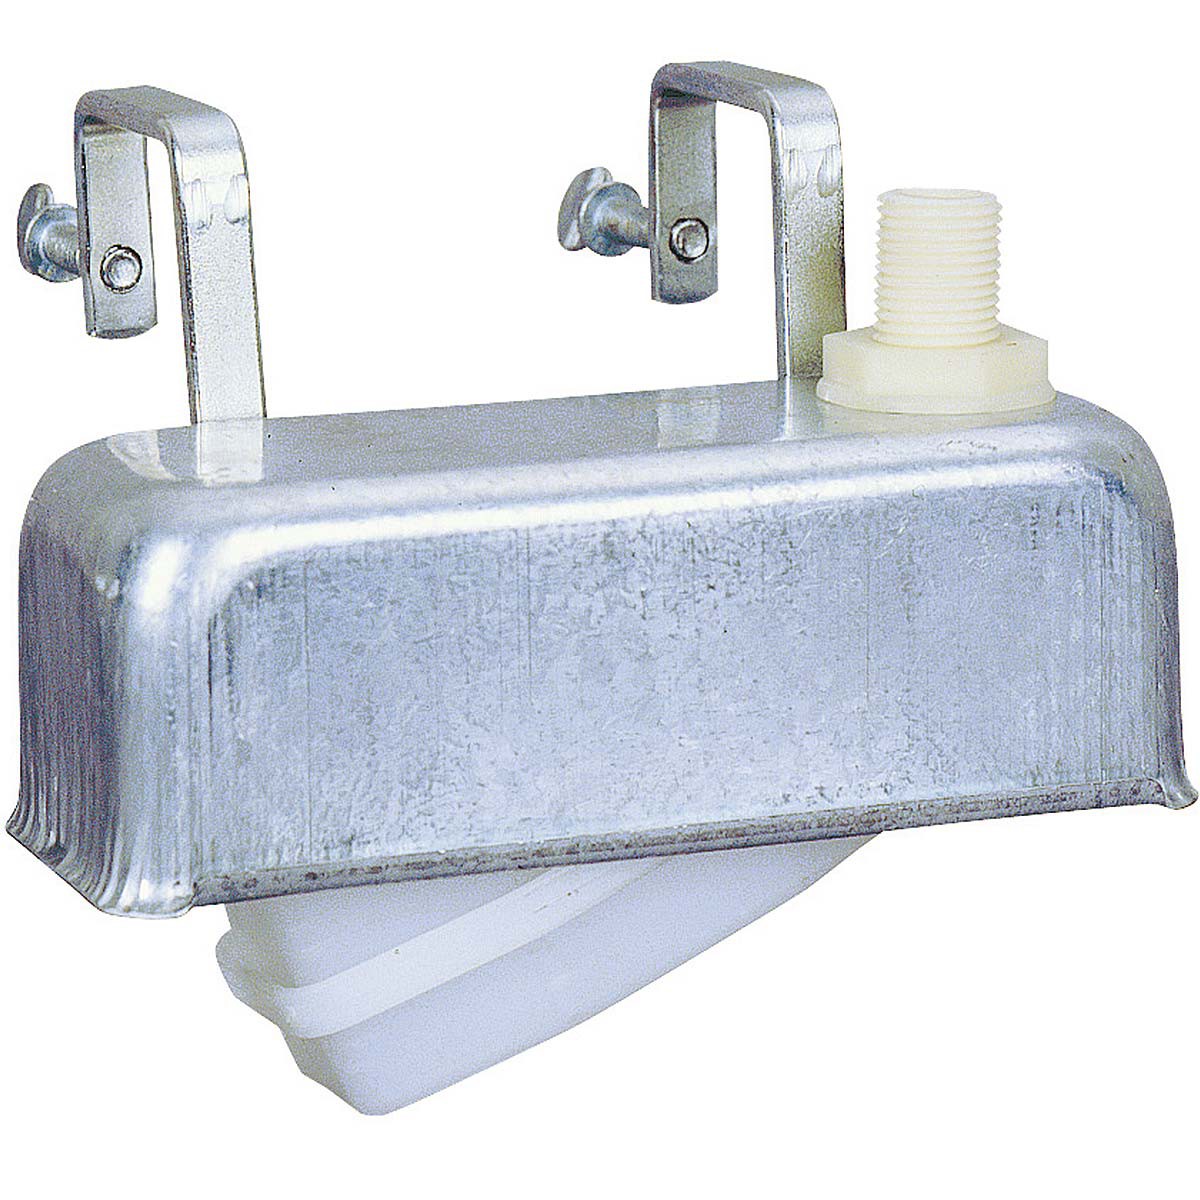 Suspended float valve stainless steel f pasture well